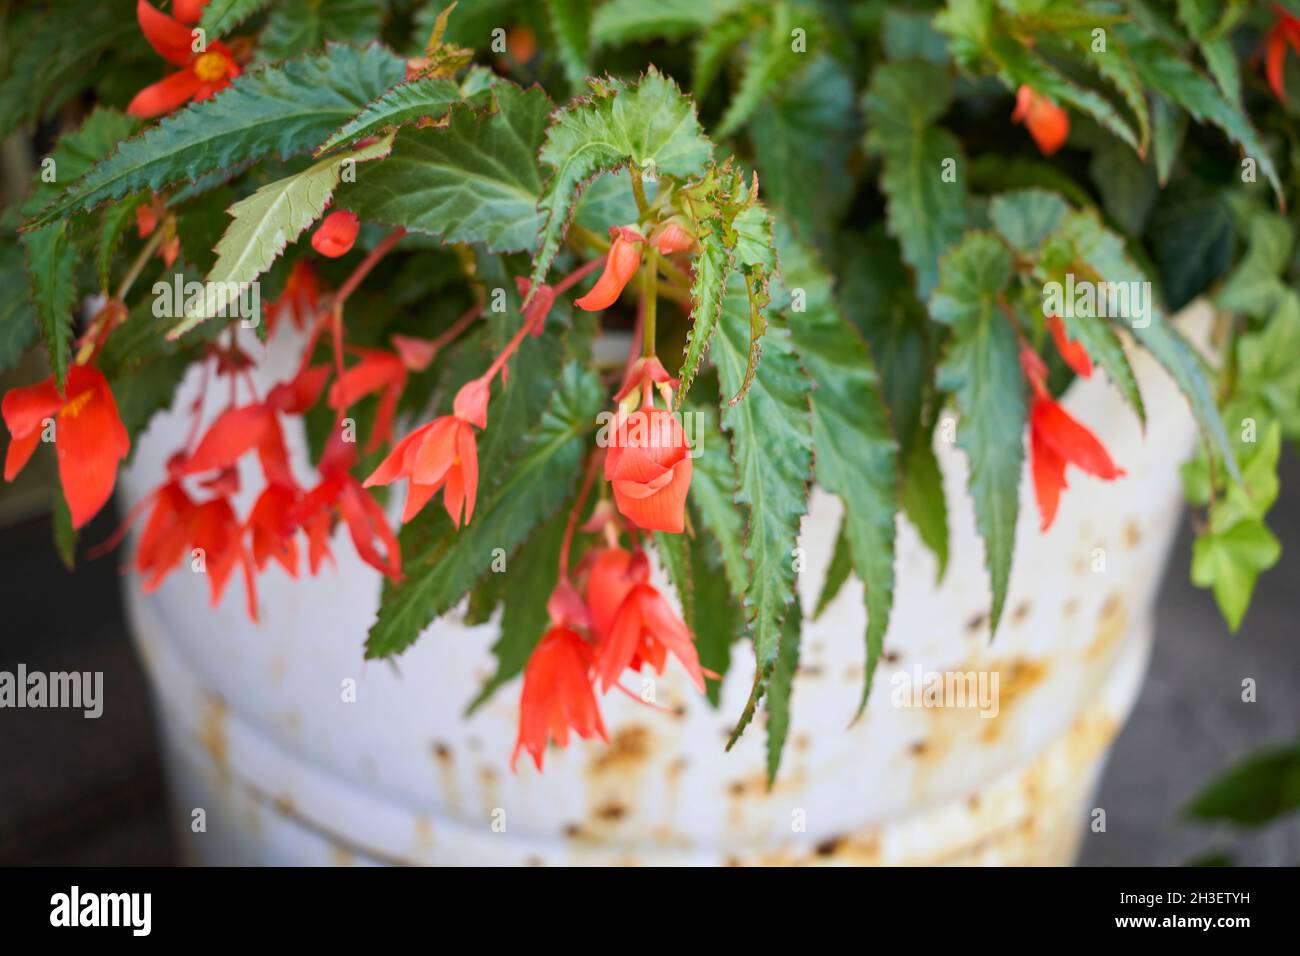 Begonia boliviensis in bloom Stock Photo